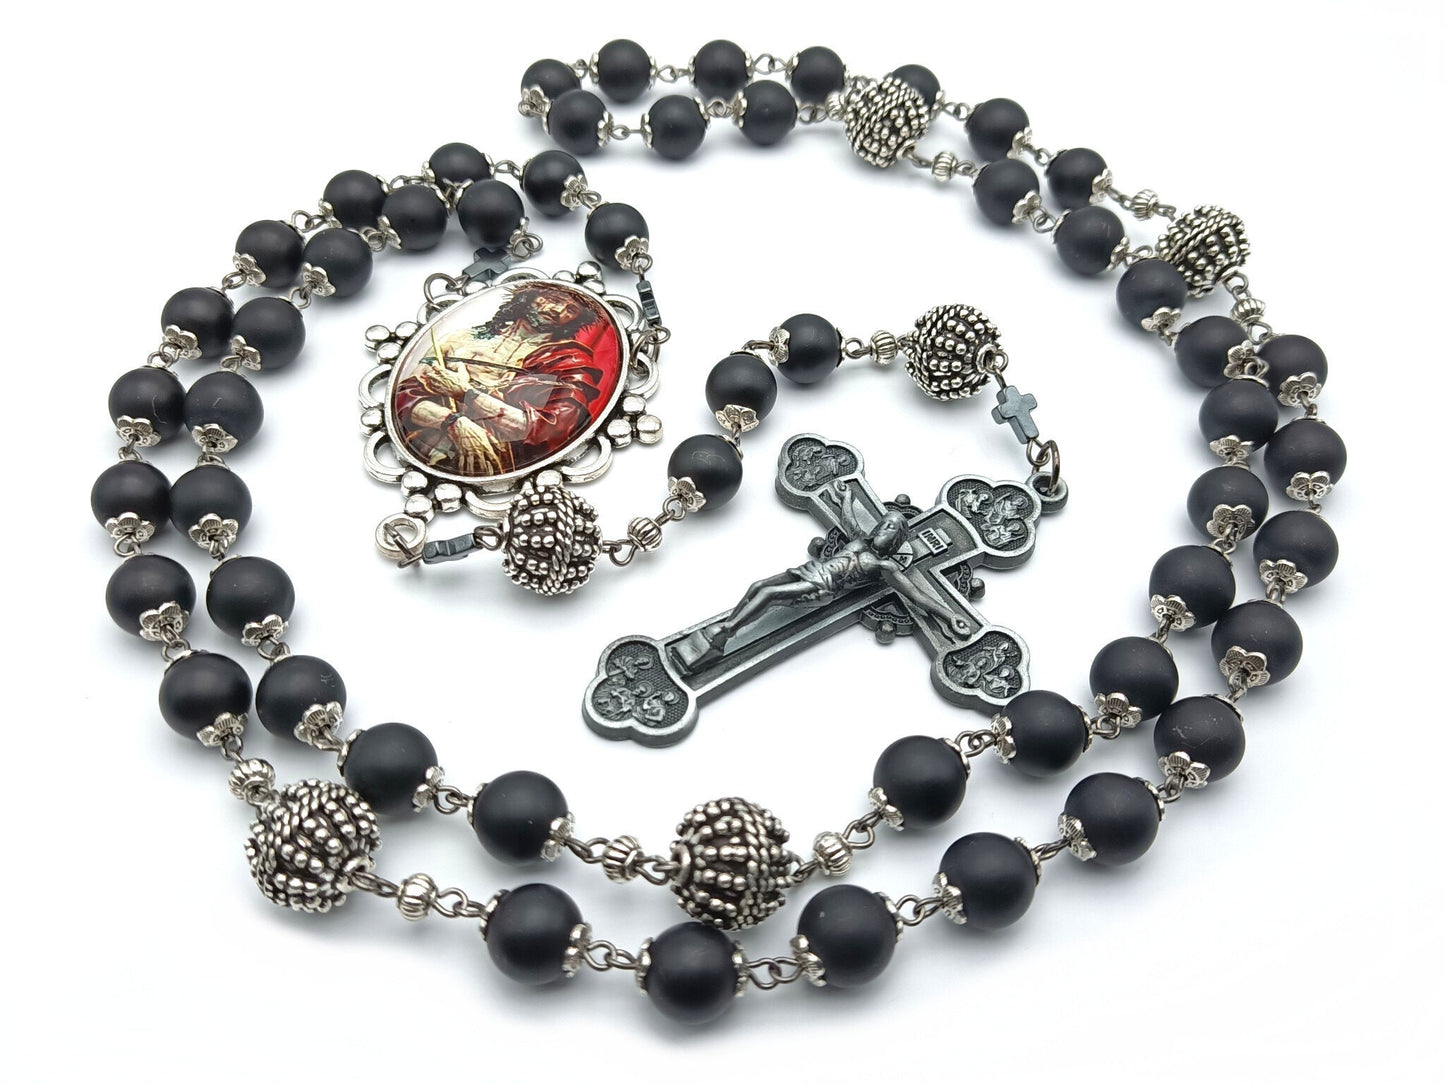 The Crucifixion unique rosary beads with onyx beads, silver pater beads, pewter twelve Apostles crucifix and picture centre medal.